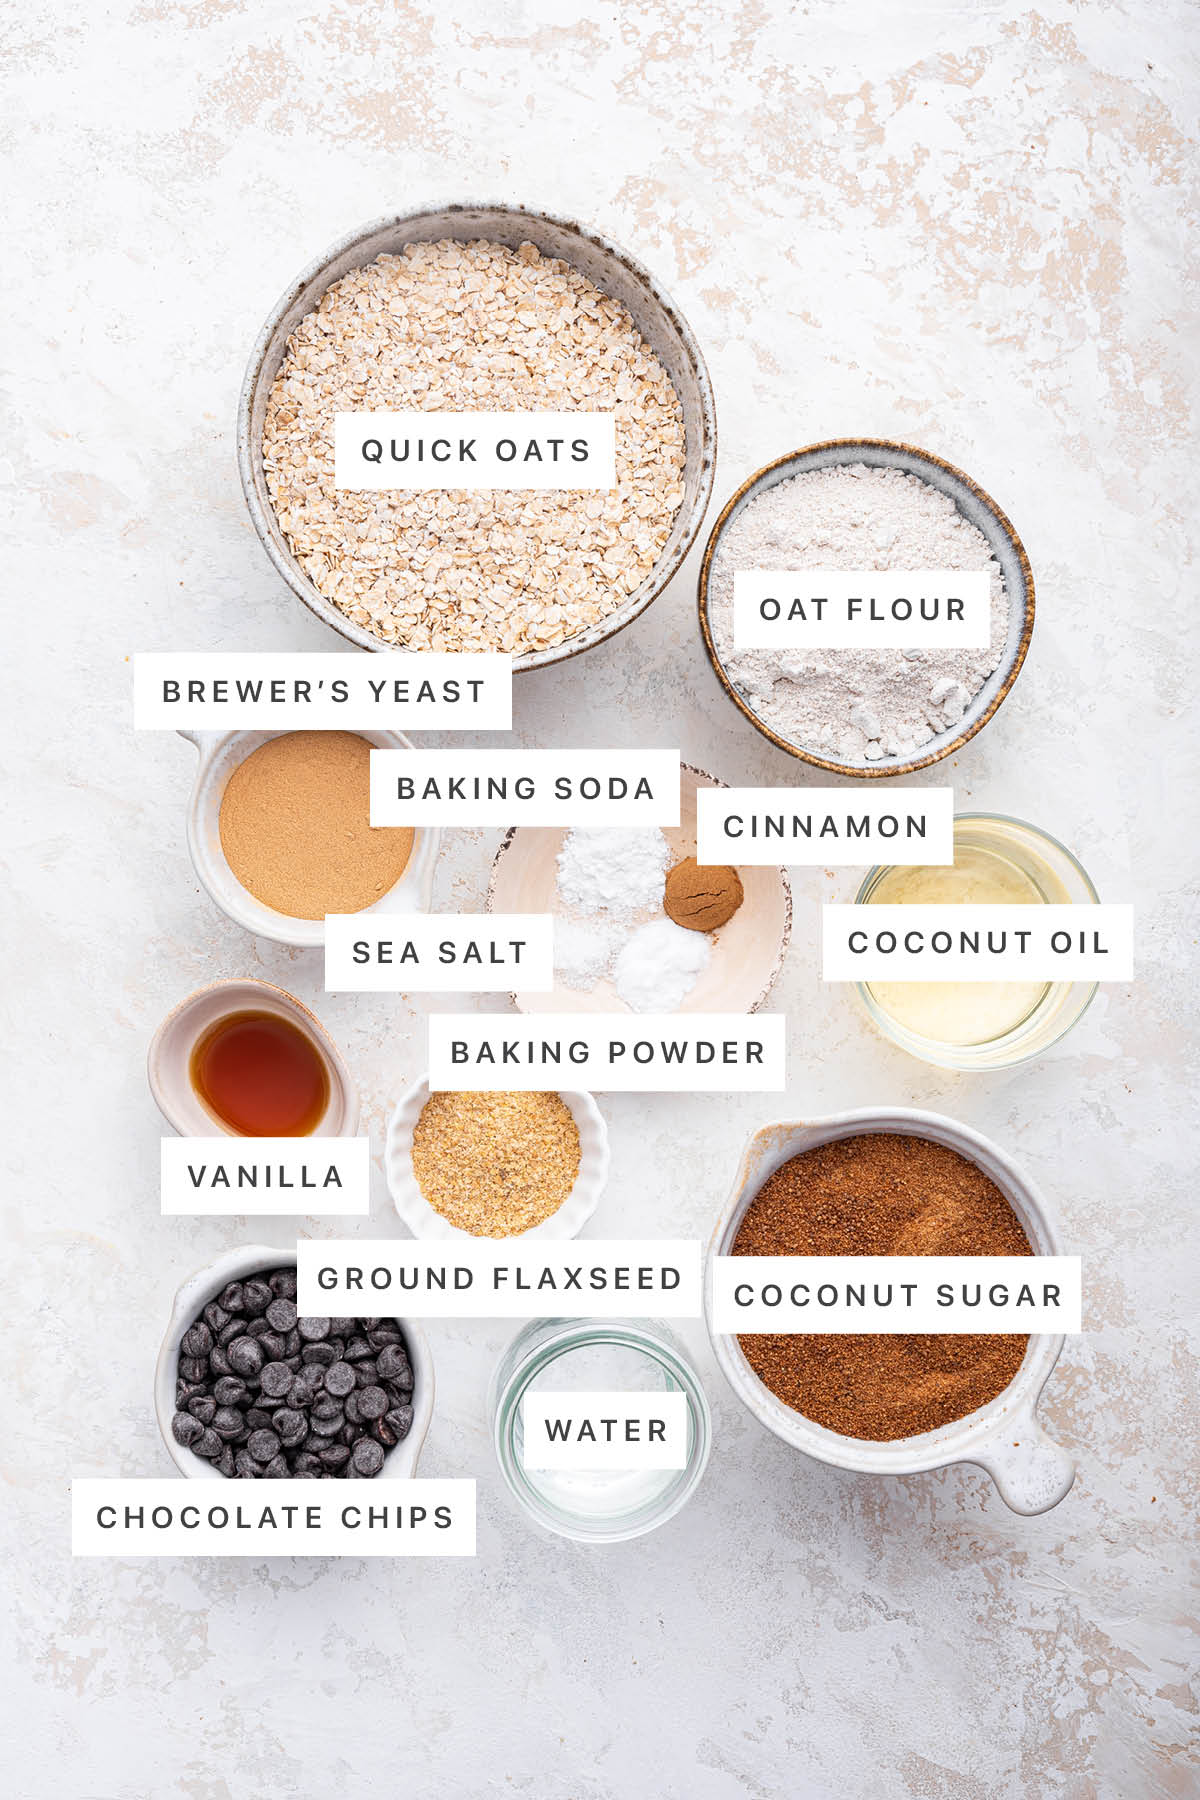 Ingredients measured out to make Healthy Lactation Cookies: quick oats, oat flour, brewer's yeast, baking soda, cinnamon, coconut oil, sea salt, baking powder, vanilla, ground flaxseed, chocolate chips, water and coconut sugar.